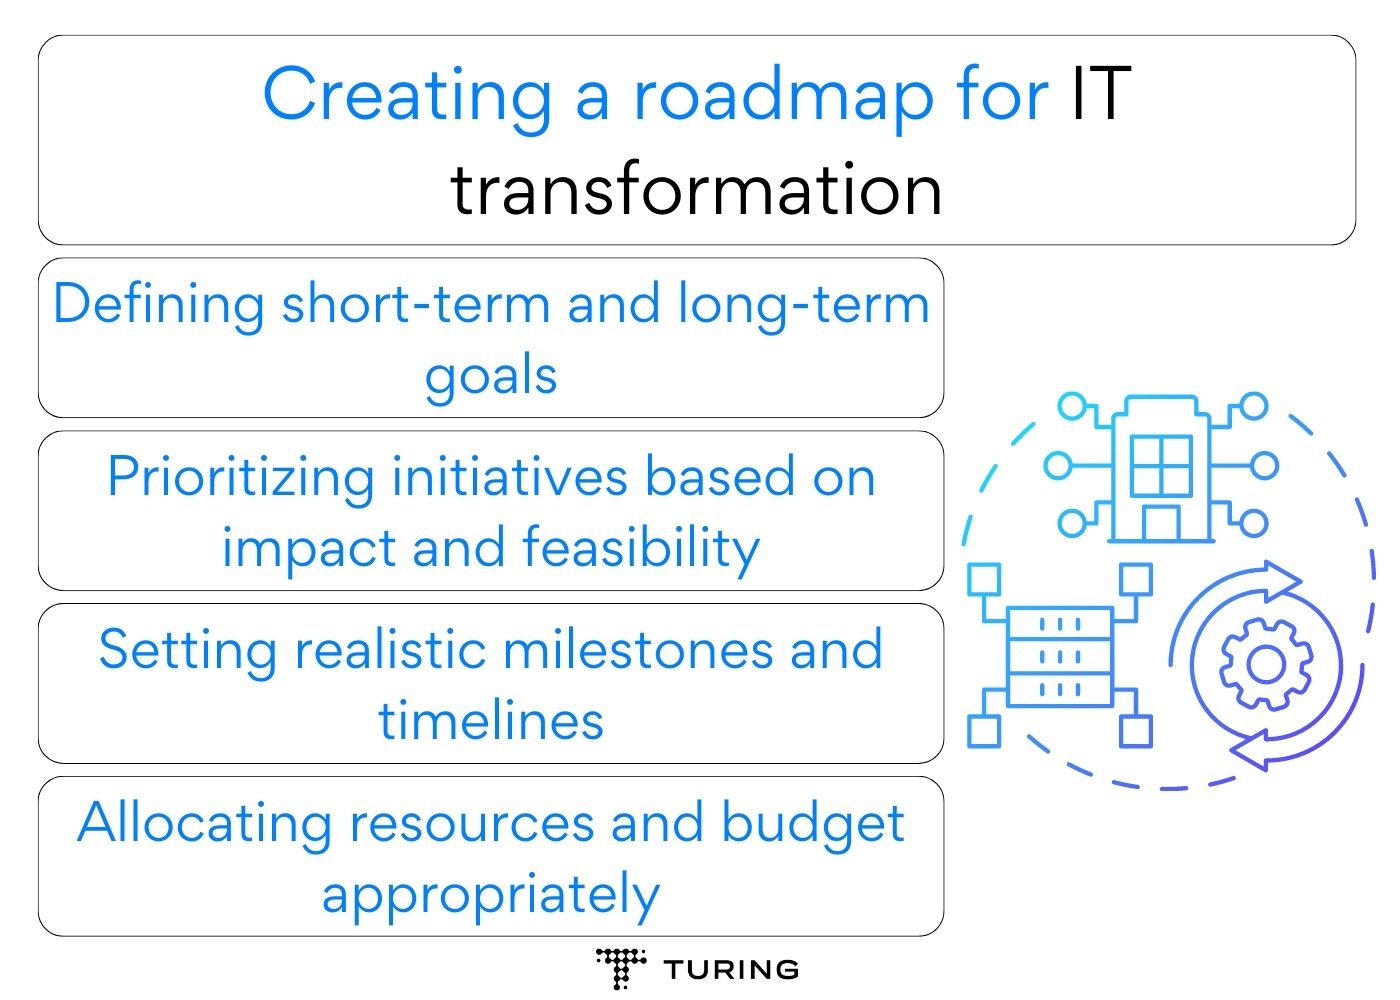 IT tranformation strategy: Creating a roadmap for IT transformation